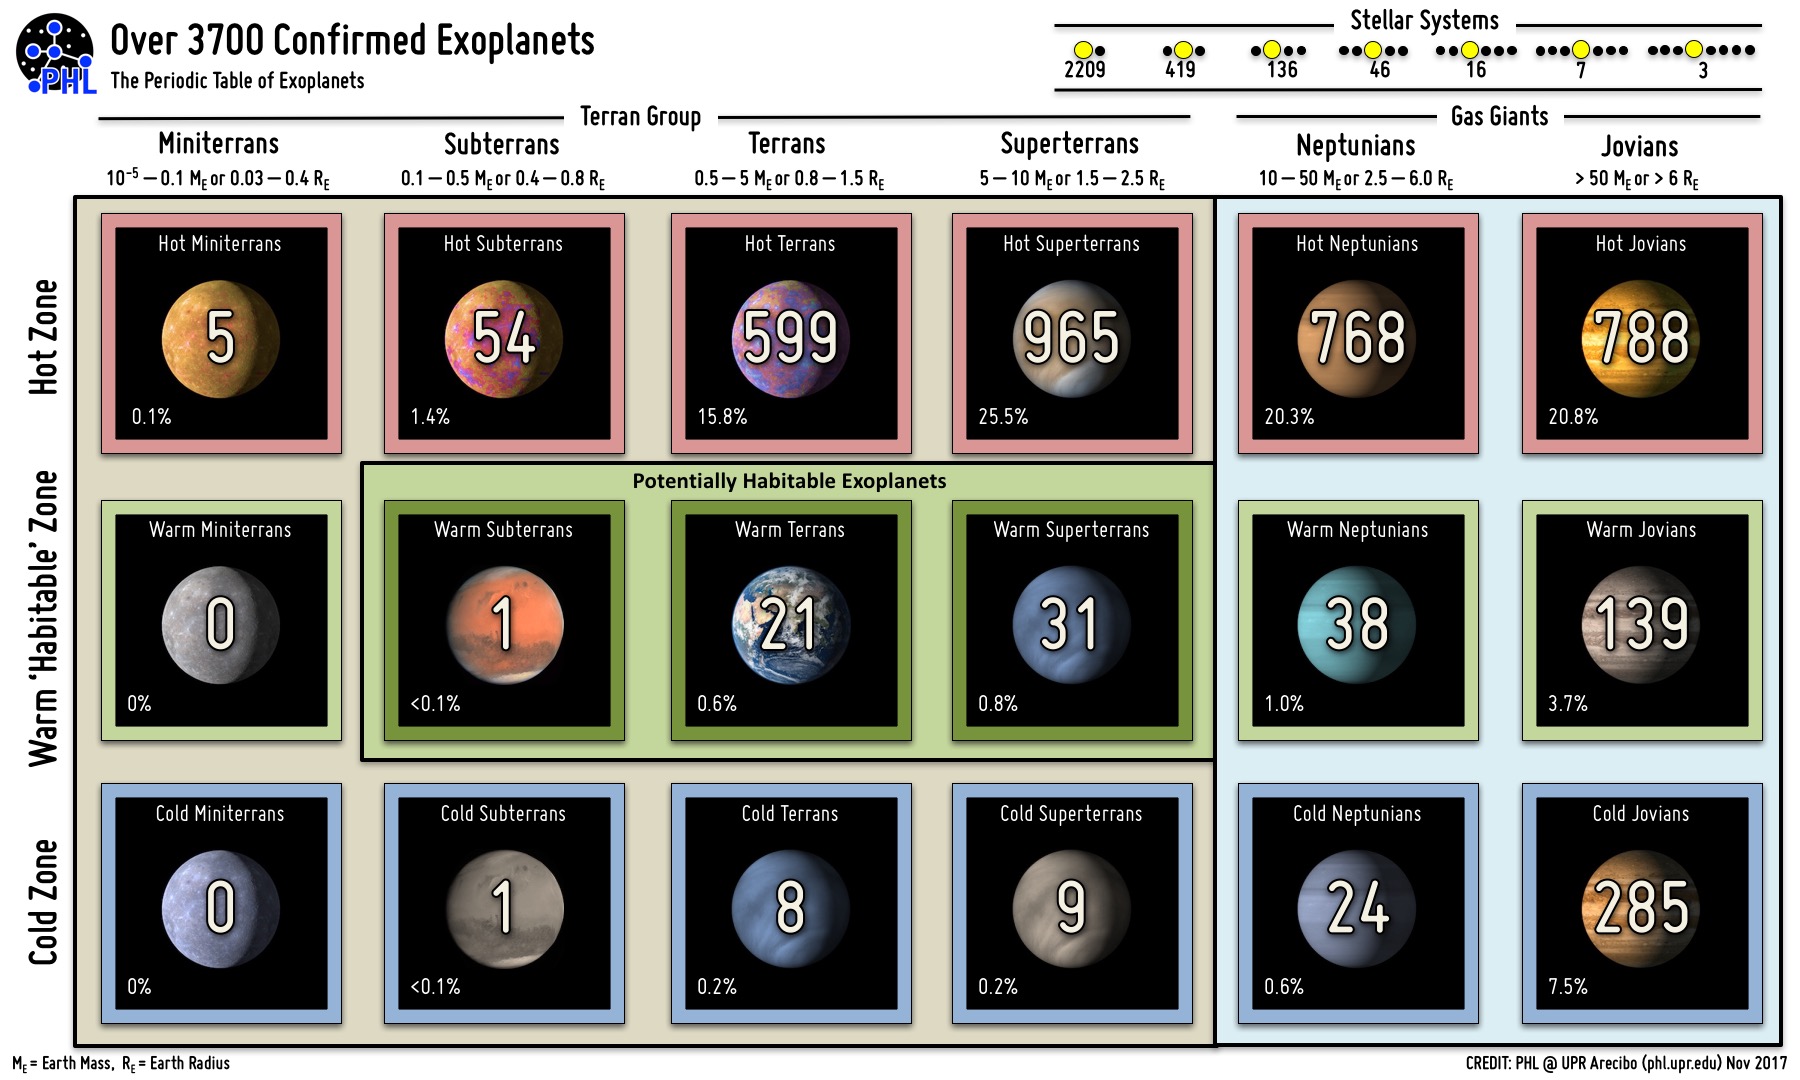 The periodic table of the confirmed exoplanets. For figure description, please see Figure 4. Unlike Figure 4, the cold zone of Miniterrans has 0 objects, whereas the hot zone of Superterrans, Neptunians, and Jovians are greatly populated. Furthermore, the habitable zone has several Terrans and Superterrans. Because of our current inability to detect smaller exoplanets and exomoons (moons of exoplanets), the Miniterrans’ columns are sparsely populated.